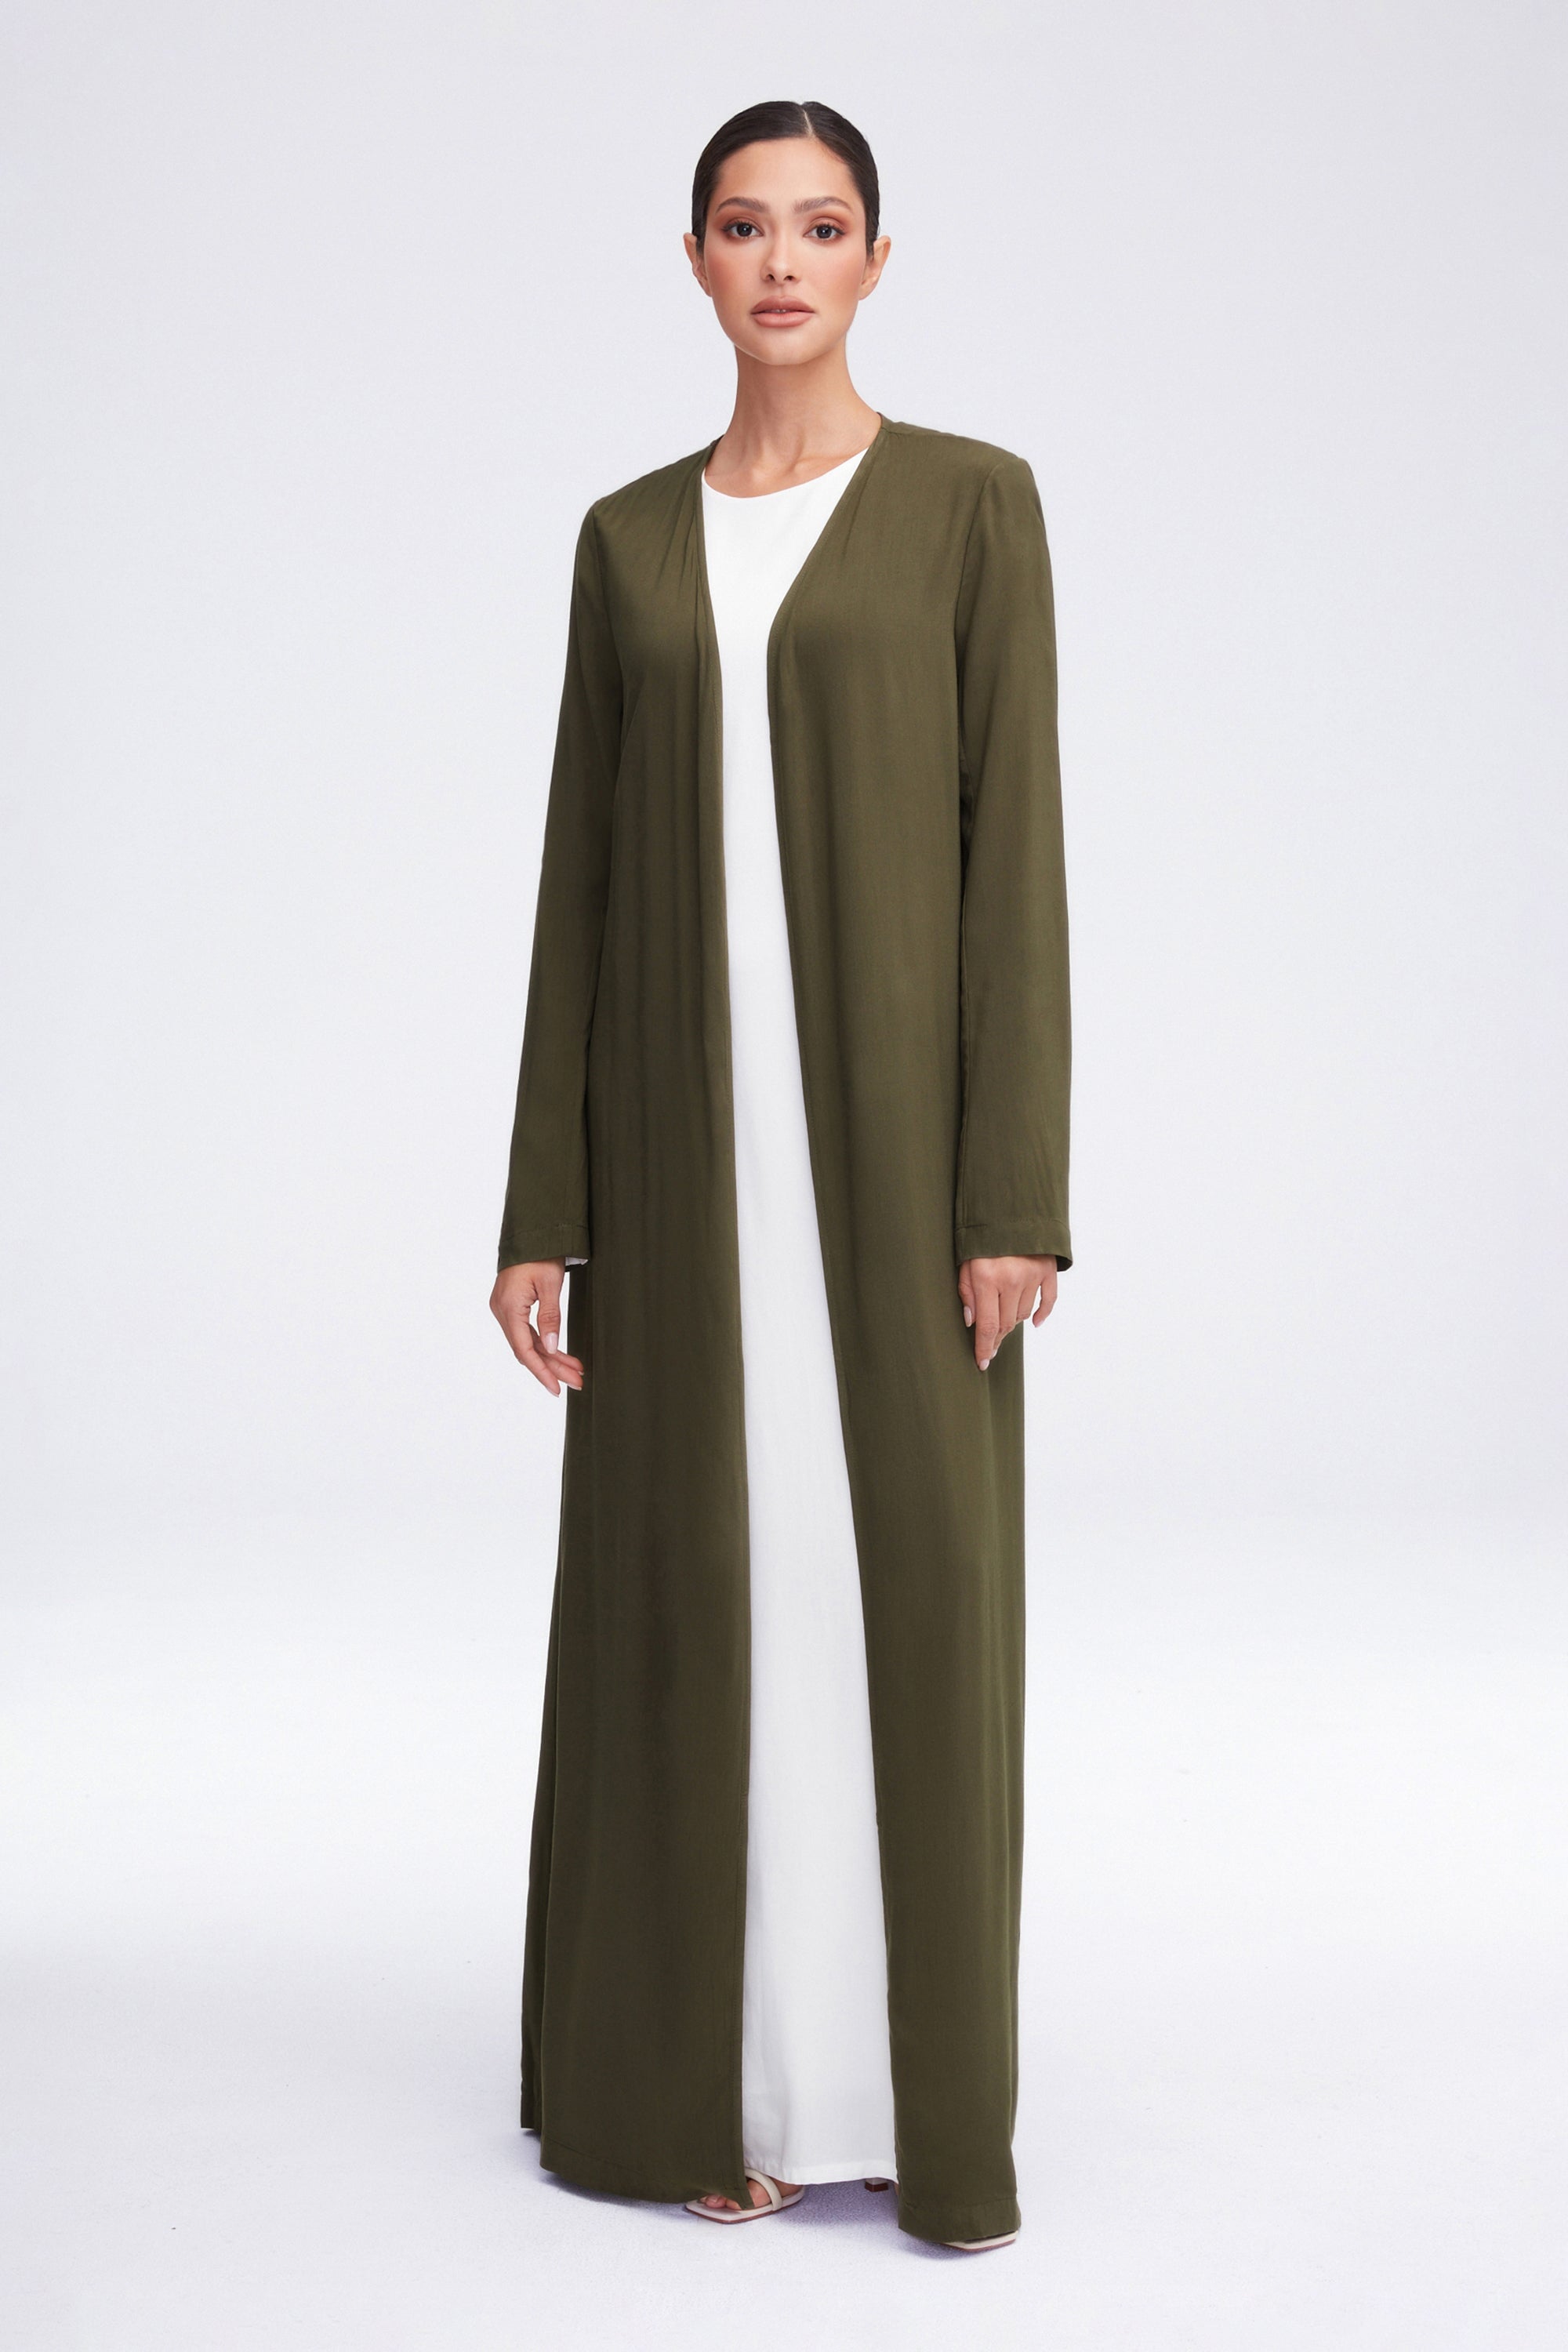 Essential Woven Open Abaya - Olive